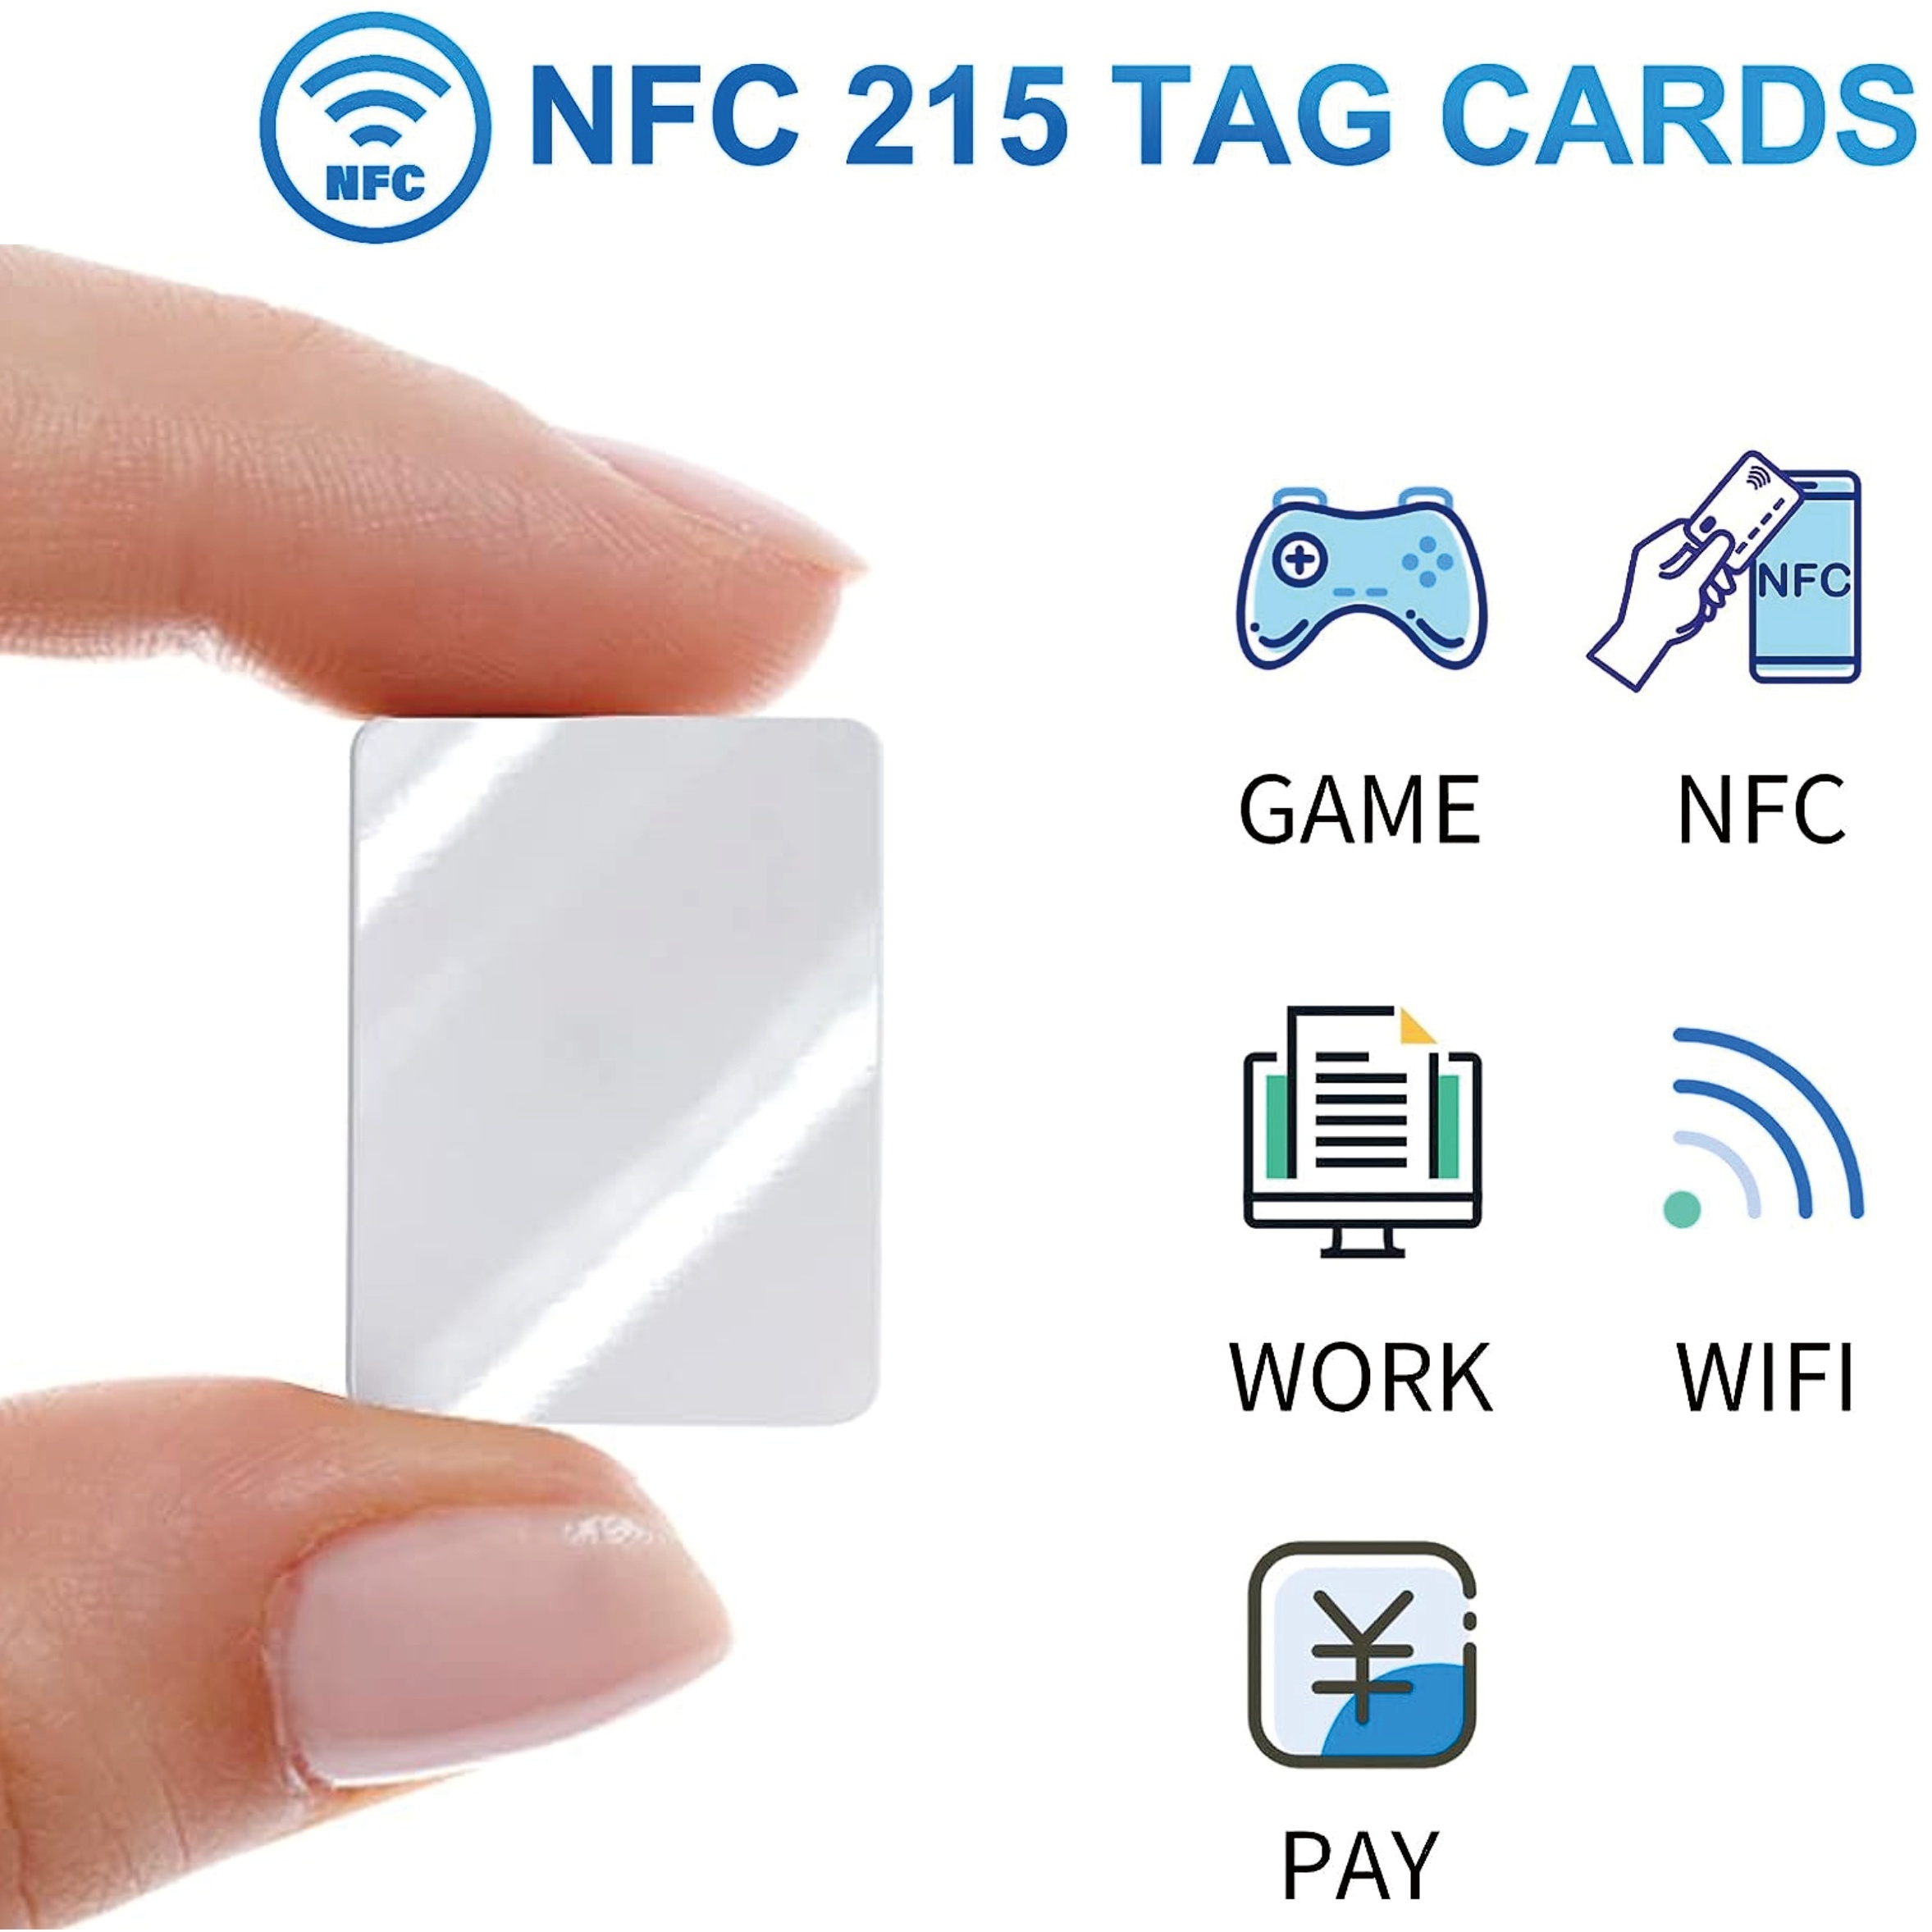  K LAKEY 10pcs NFC Stickers Black NFC Tags NTAG215 NFC Sticker  Tags 25MM Black NFC Stickers 504 Bytes Memory Programmable NFC Tags  Compatible with Android iOS and NFC Enabled Phones